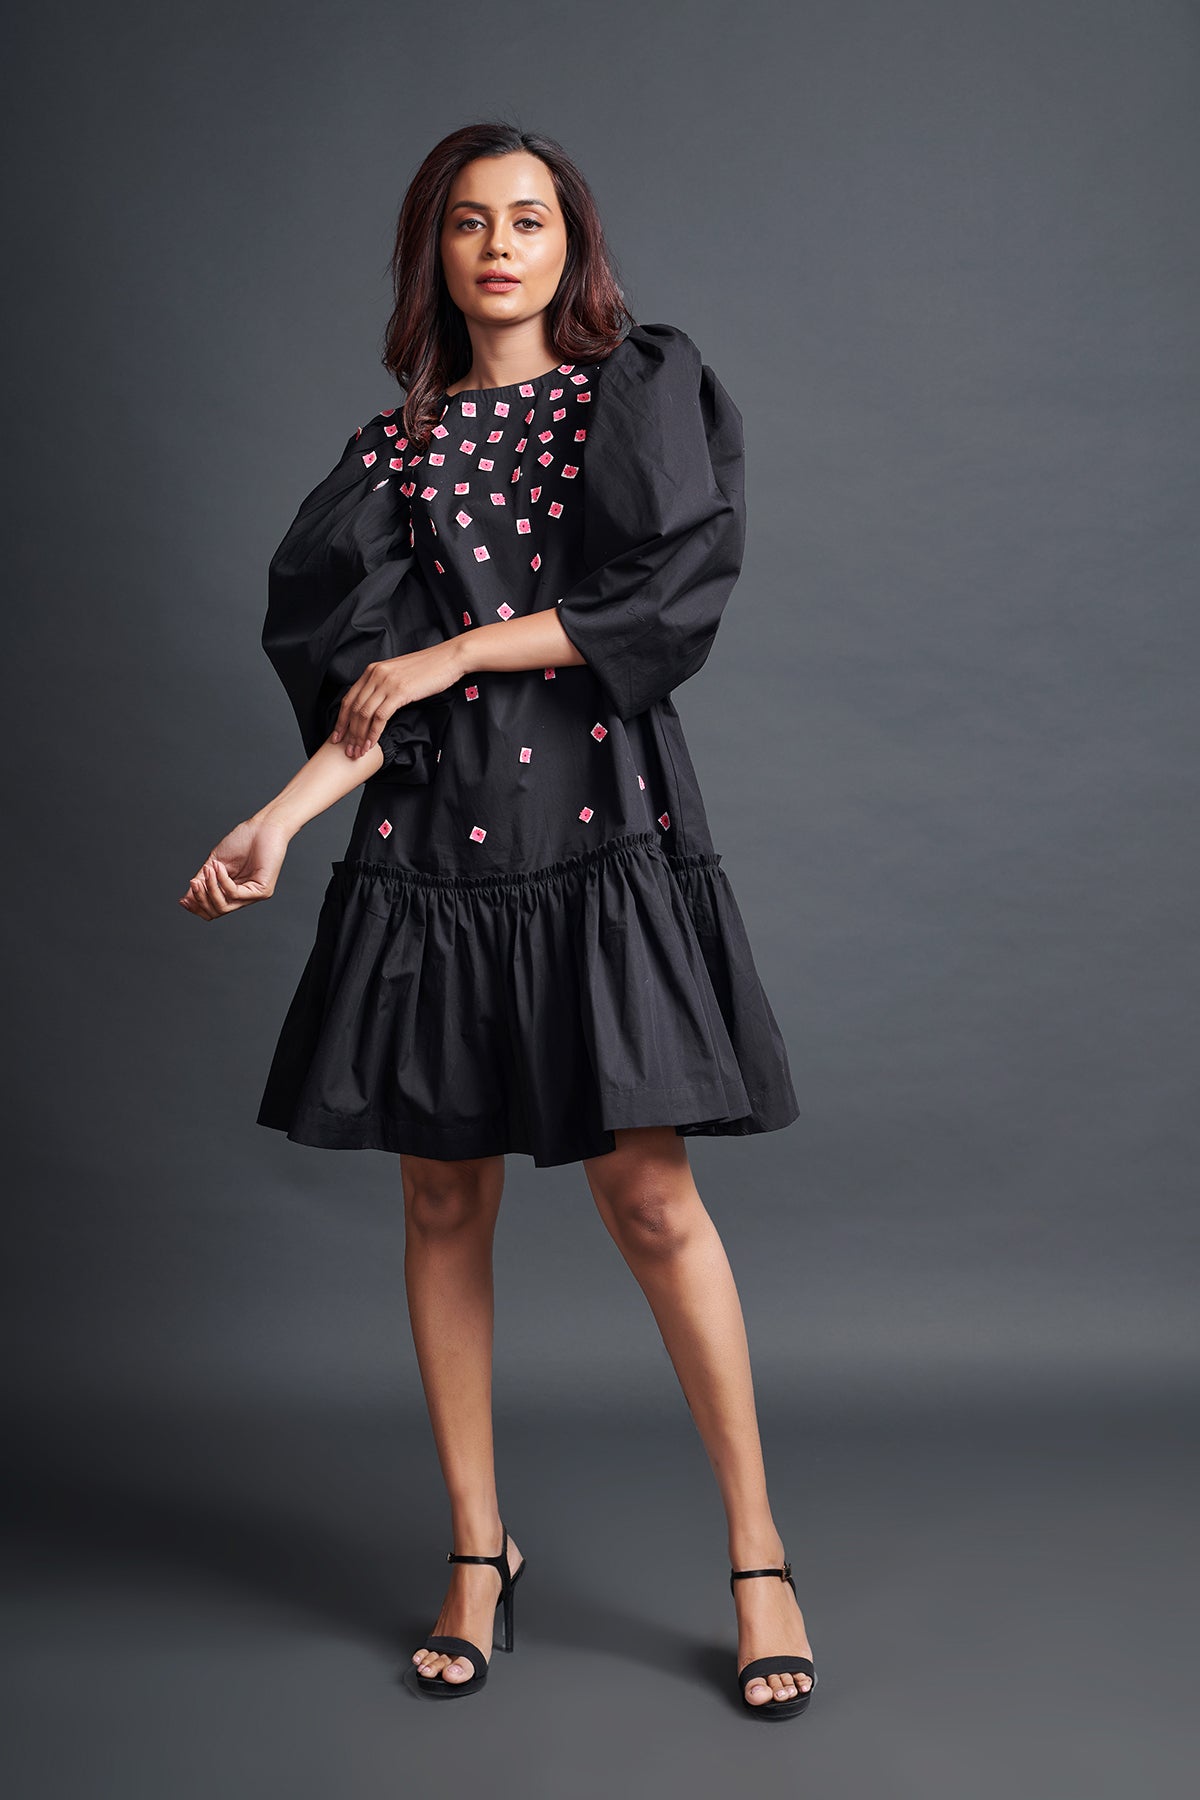 Image of BLACK GATHERED BACKLESS DRESS IN COTTON BASE WITH CUTWORK EMBROIDERY. From savoirfashions.com